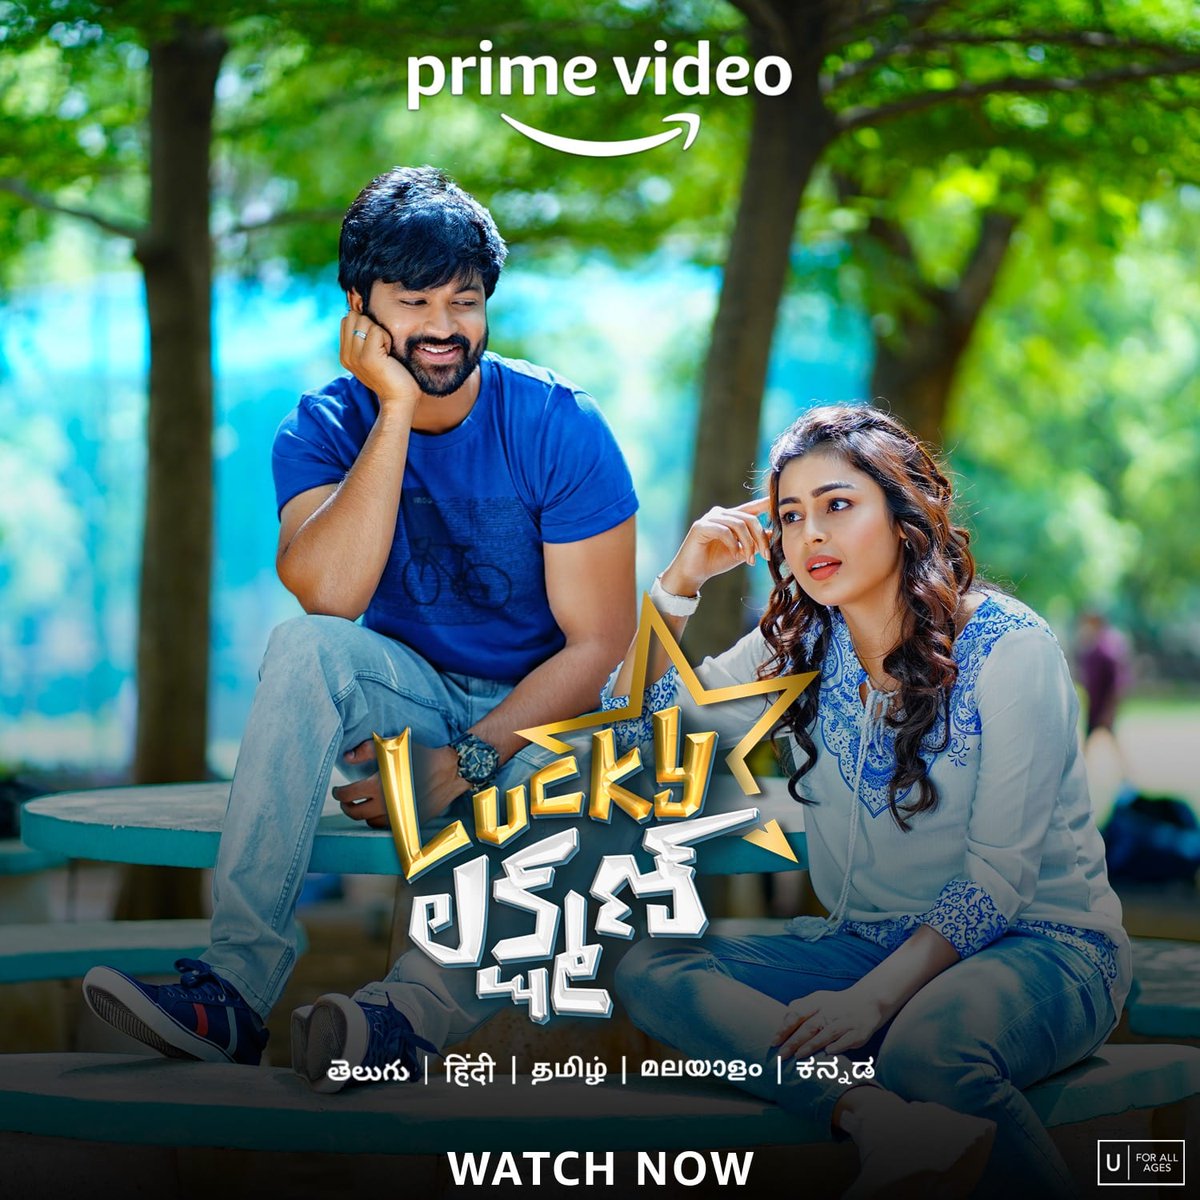 Lucky Lakshman Movie Streaming on #primevideo in 5 Languages #Telugu #Tamil #Kannada #Malayalam #Hindi Prime Link - bit.ly/3I7rXBc A Must Watch Movie with your Family 🤗